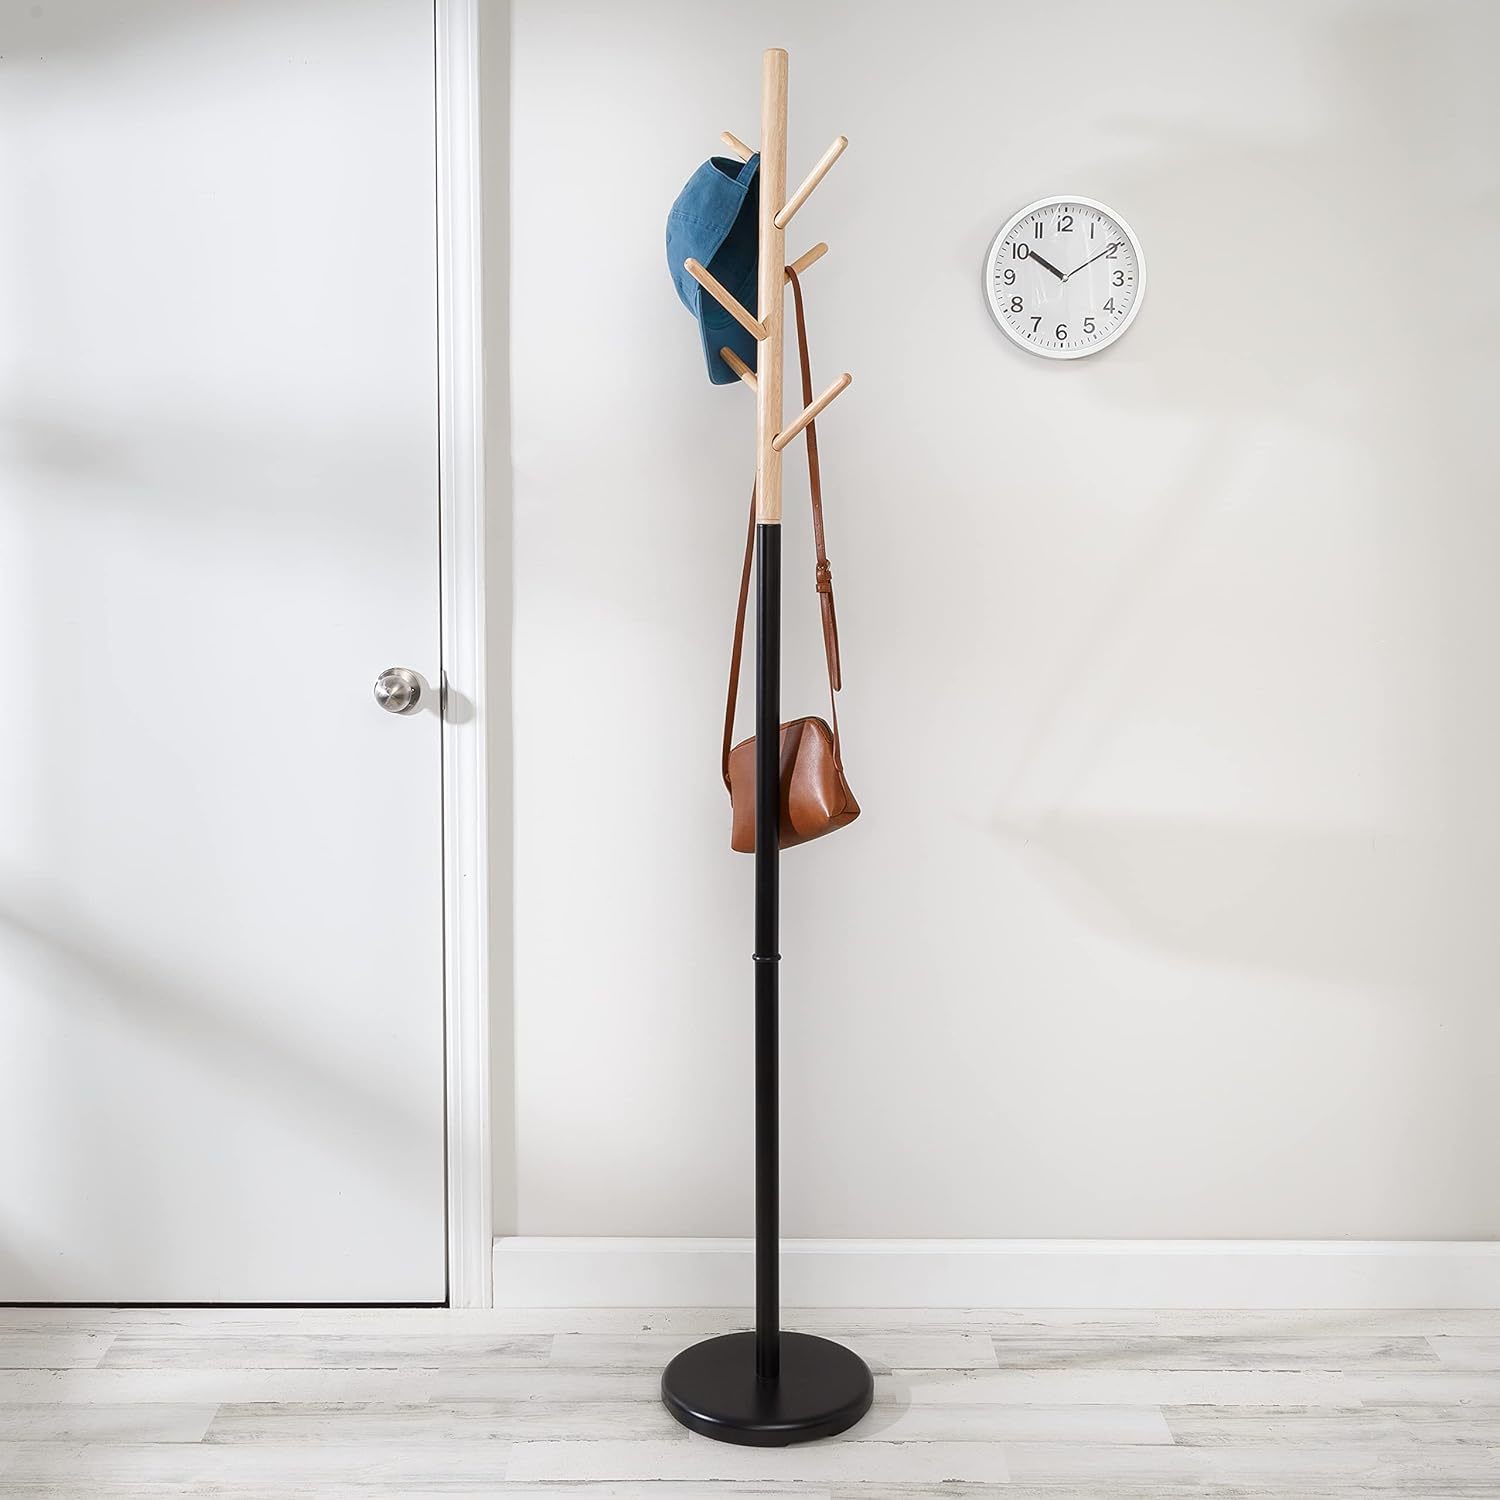 Honey-Can-Do Modern Freestanding Coat Tree Stand With Round Base,, 09527 Natural - $36.98